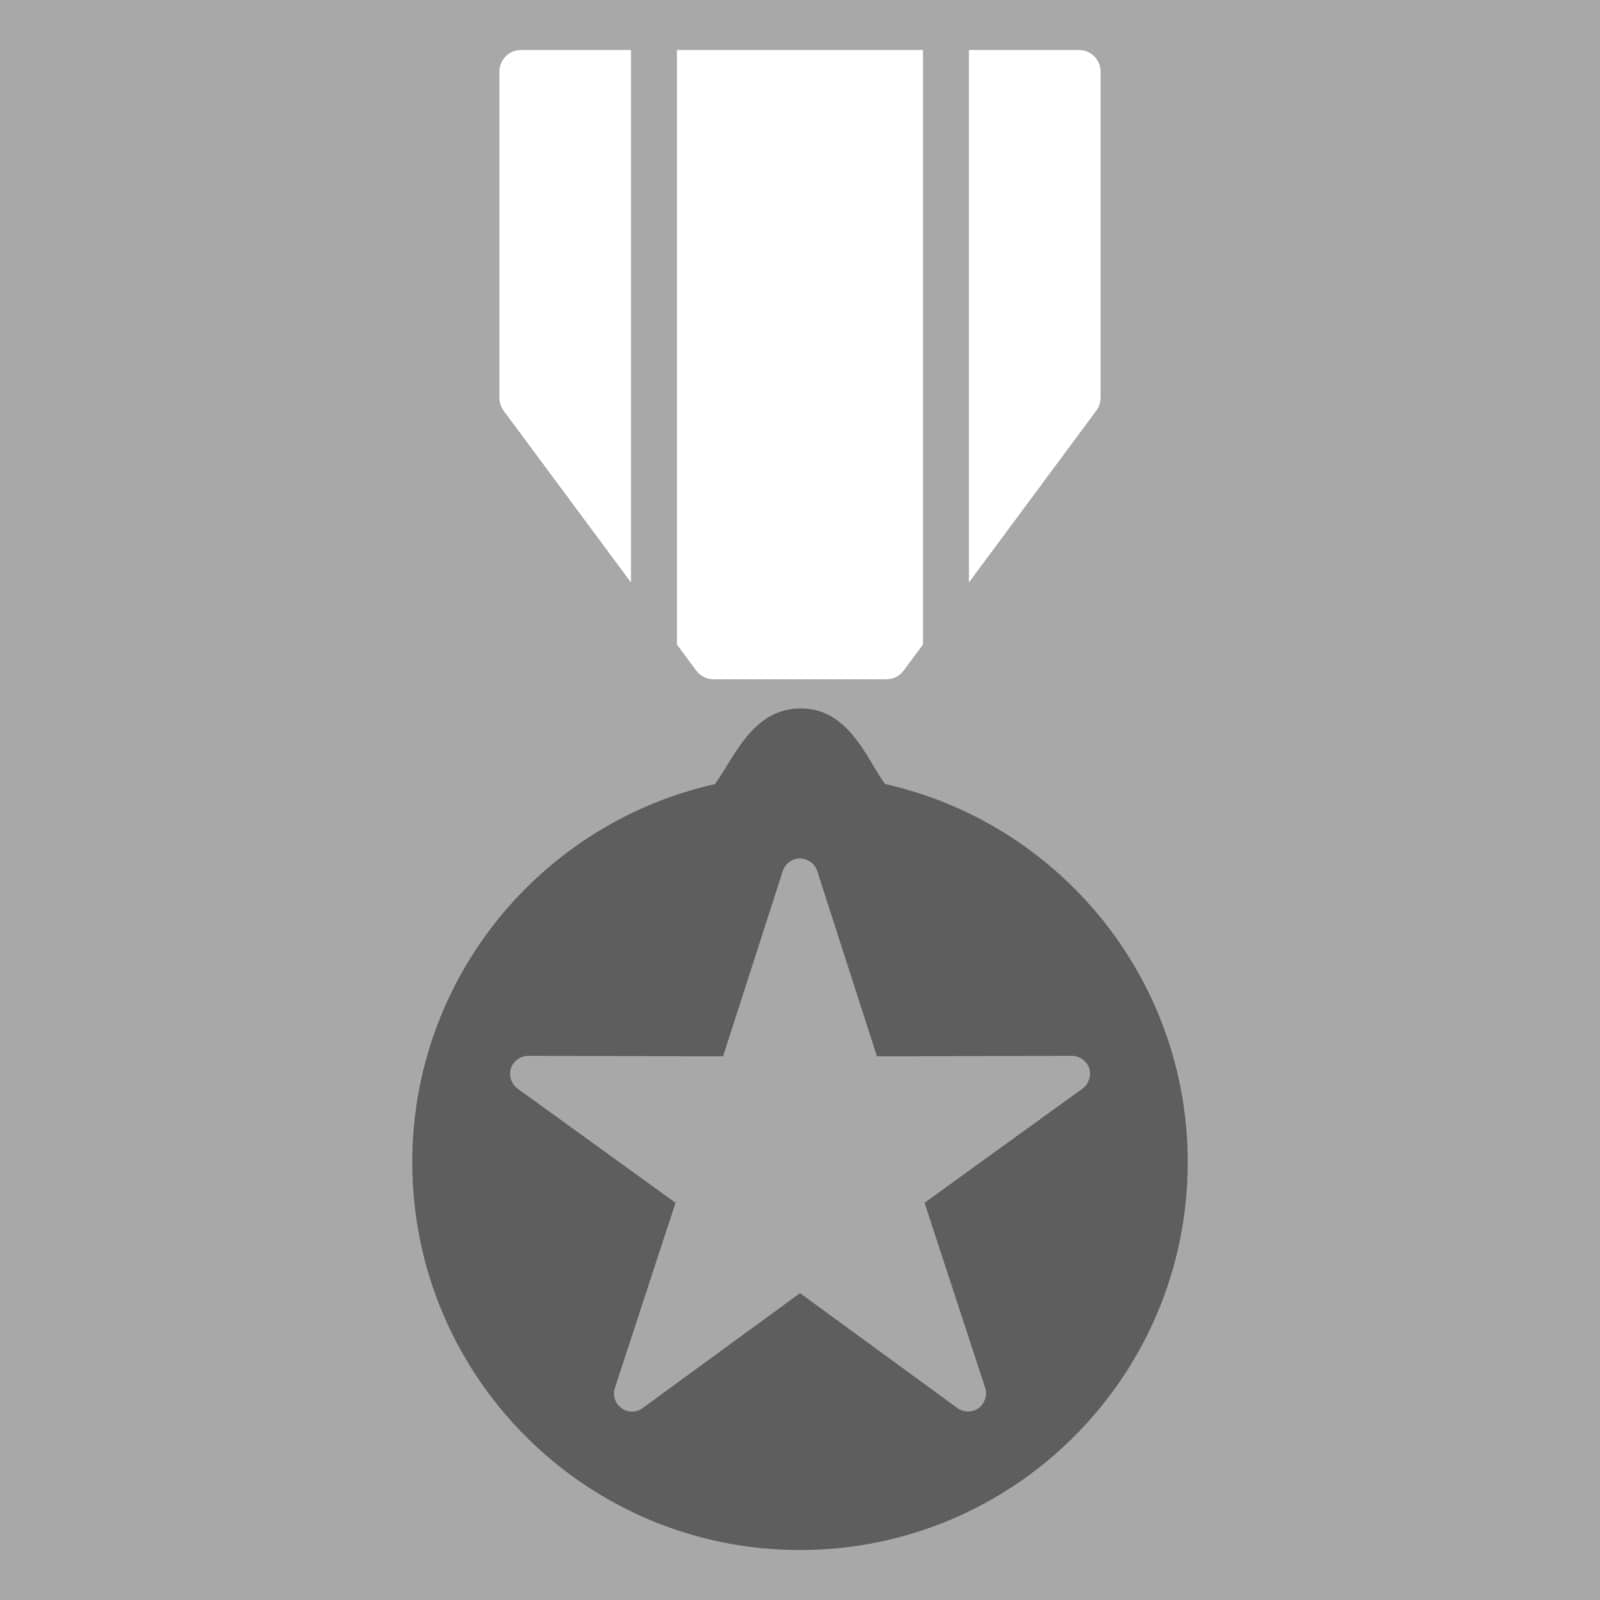 Army award icon from Competition & Success Bicolor Icon Set by ahasoft